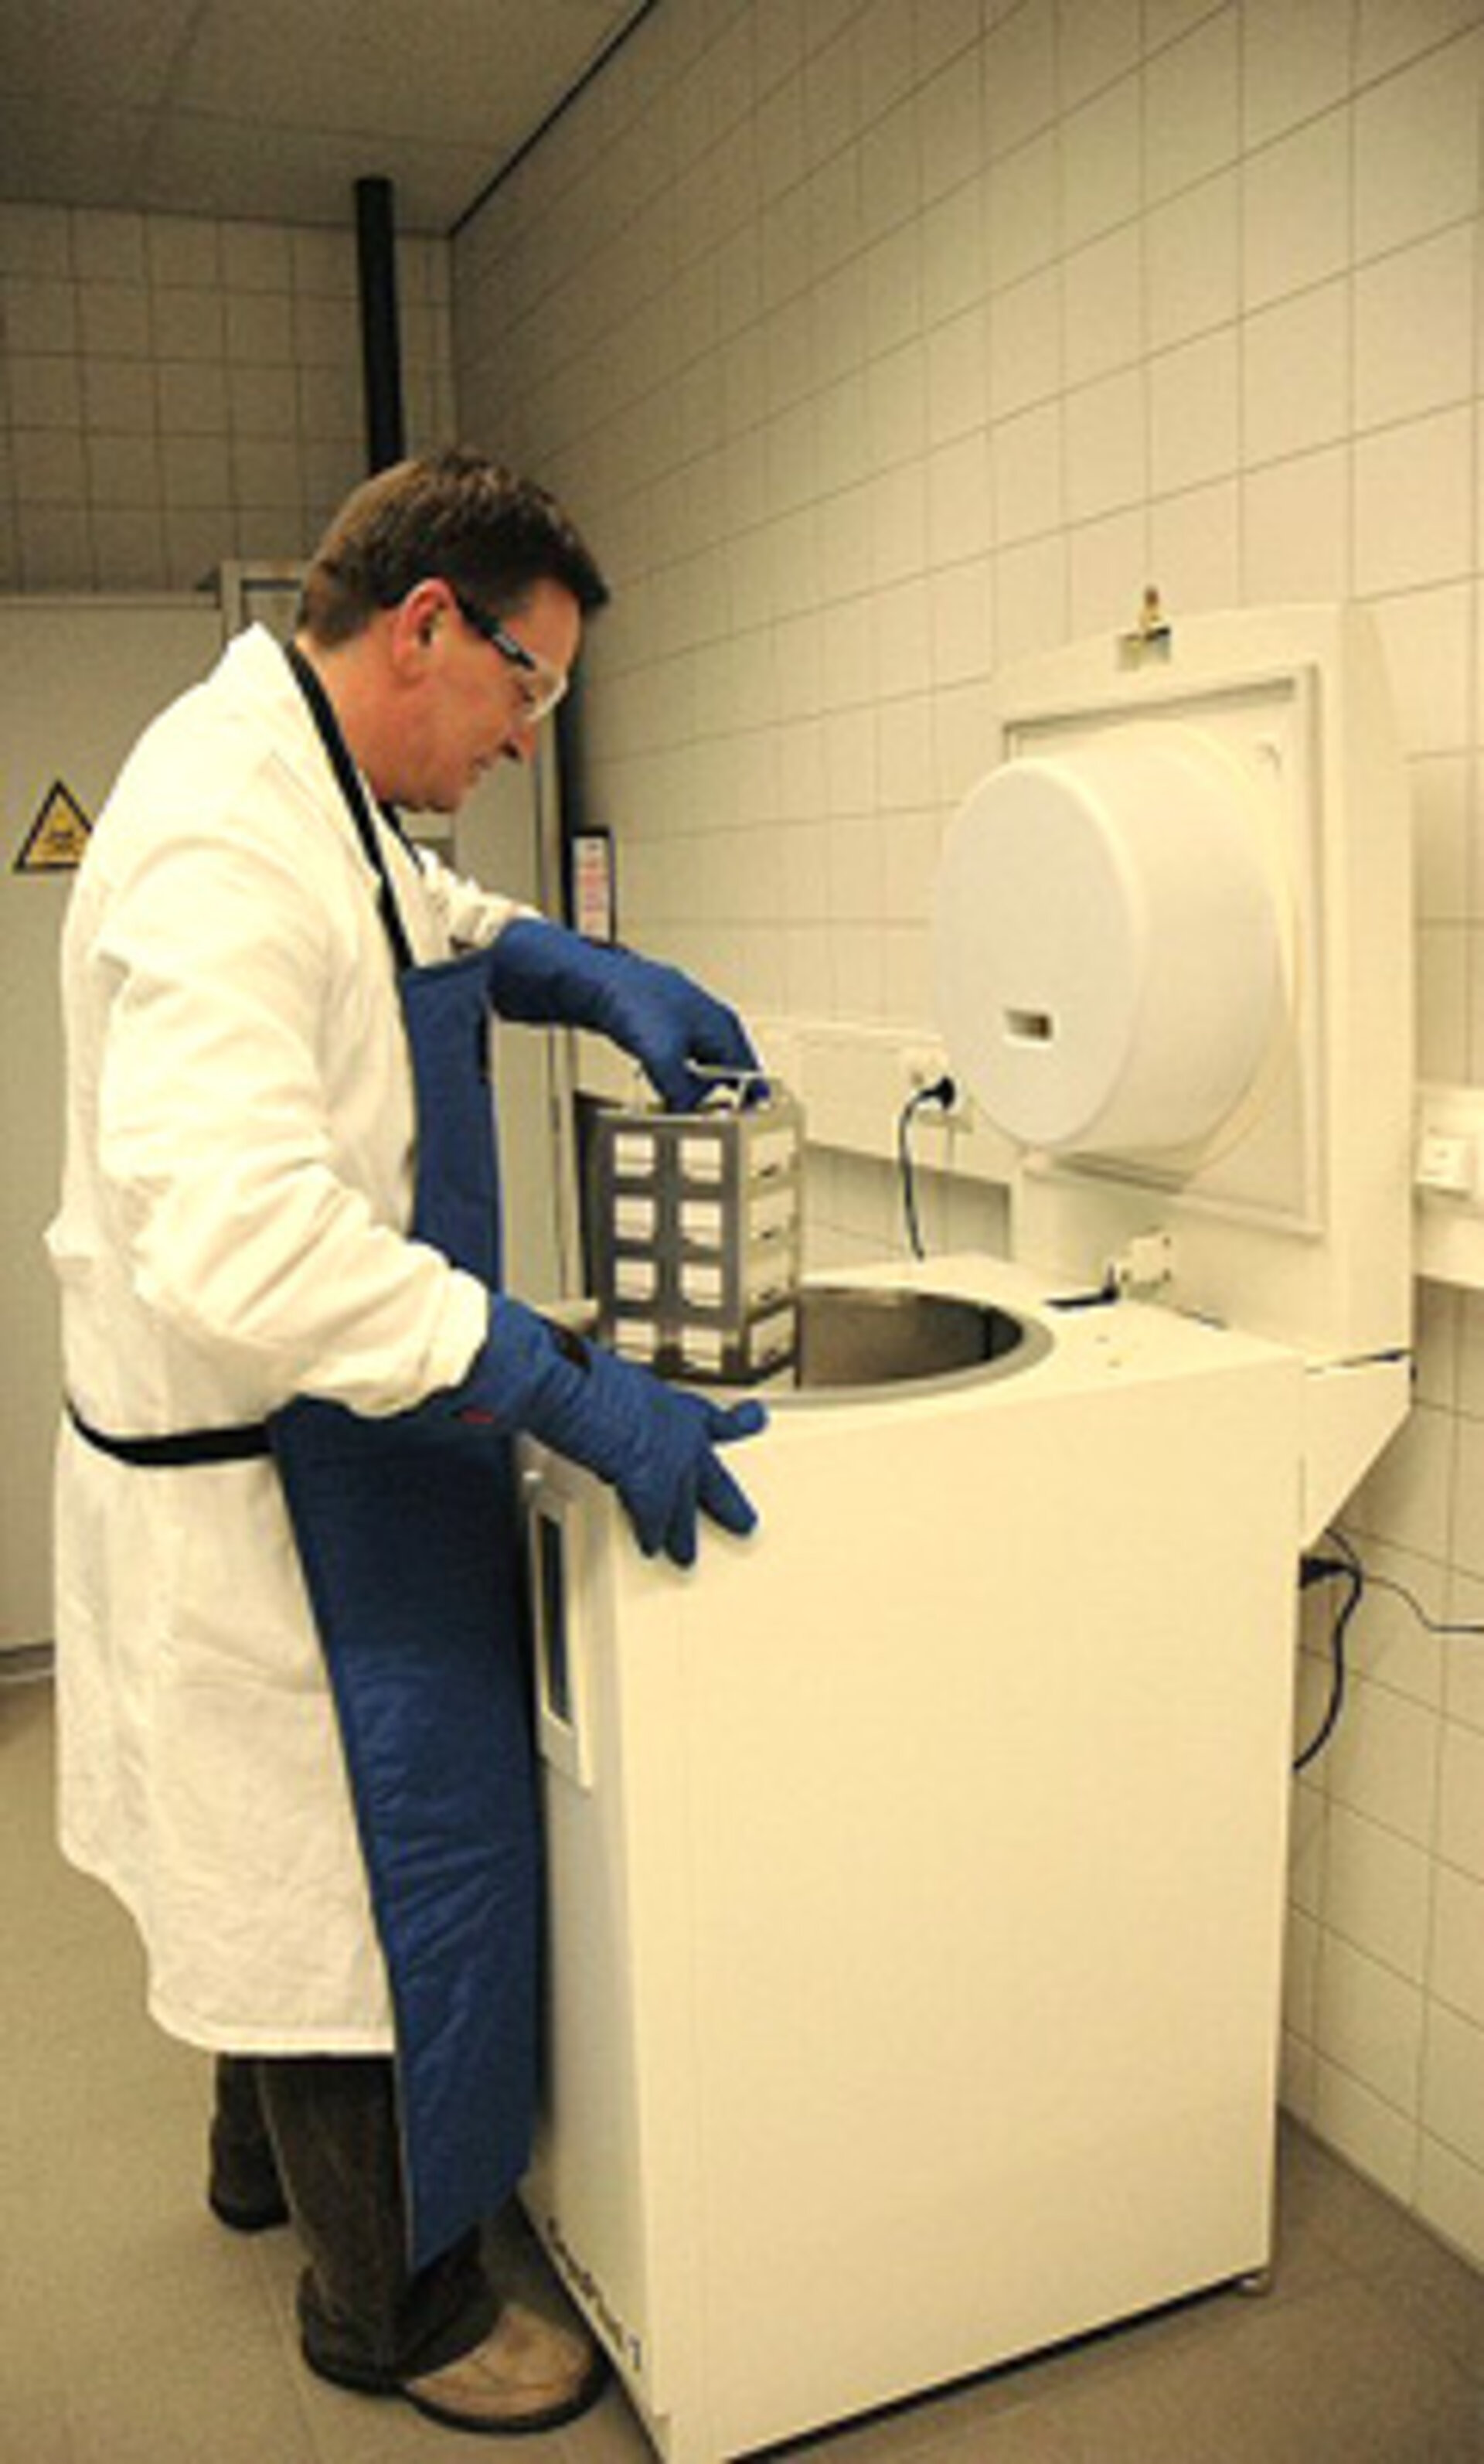 Removing samples from low temperature storage